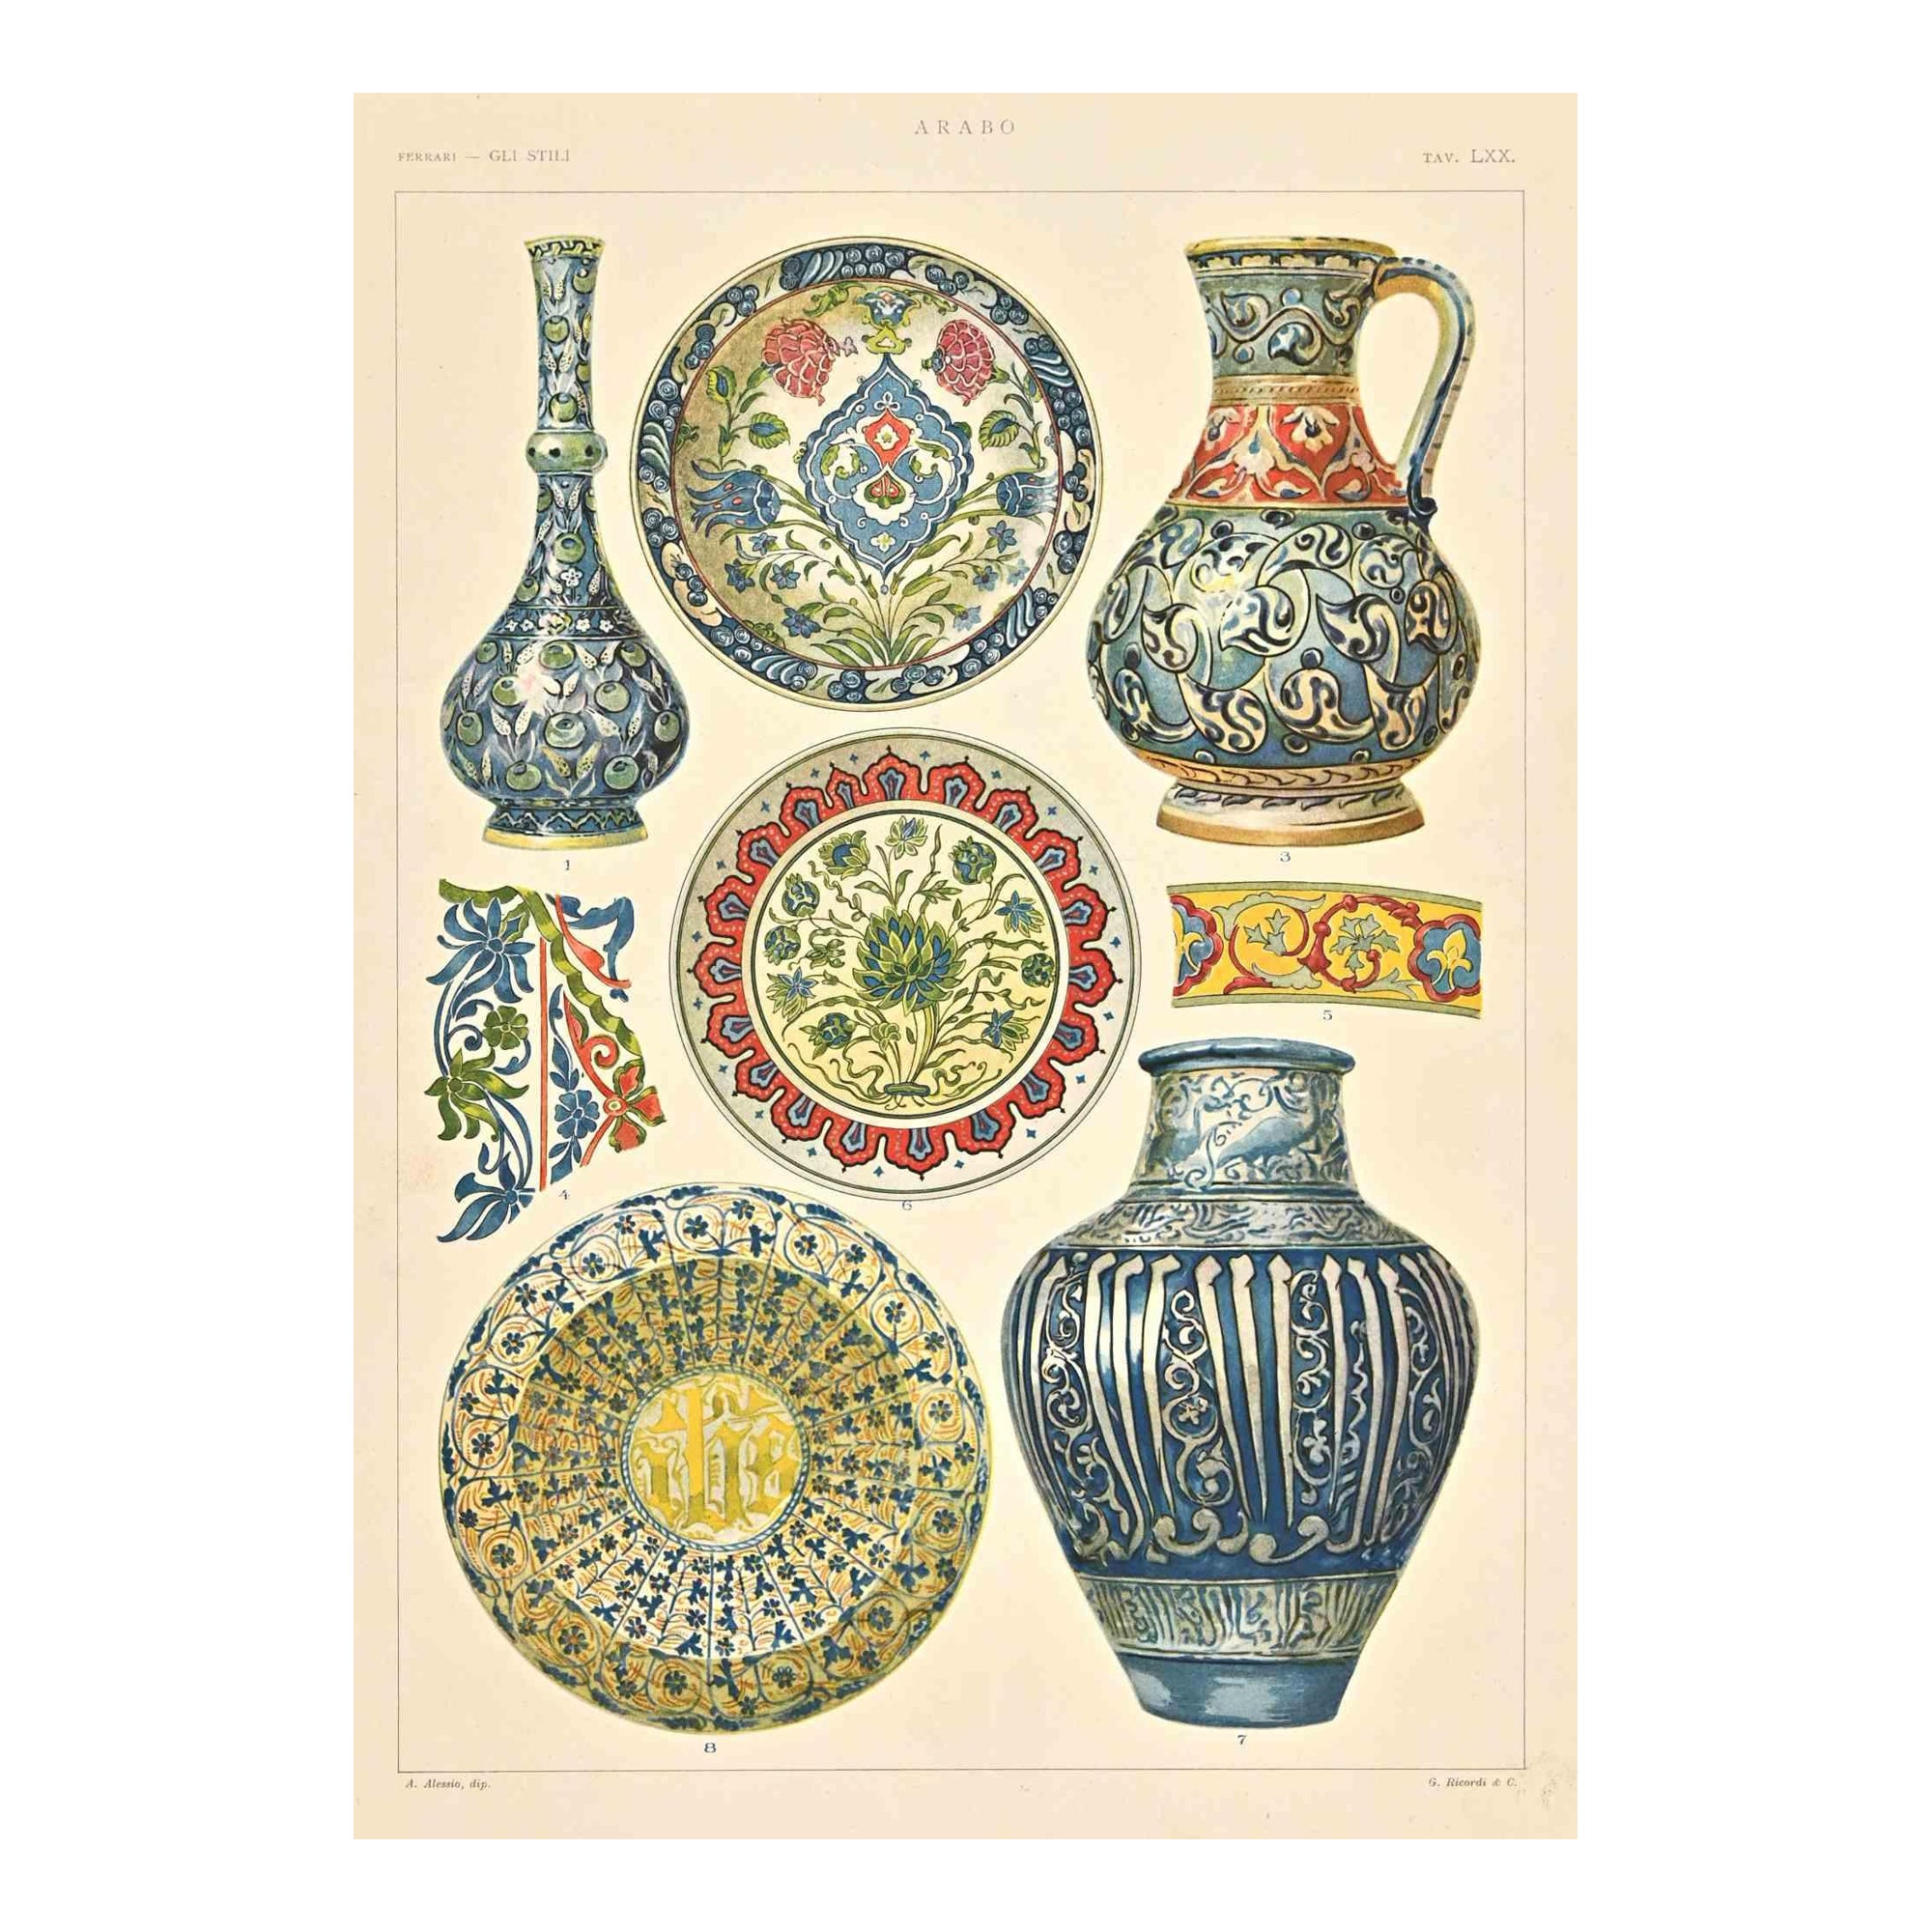 Decorative Objects in  Arab Style is a print on ivory-colored paper realized by  A. Alessio in the early 20th Century. Signed on the plate on the lower

Vintage Chromolithograph.

Very good conditions.

The artwork represents Decorative motifs